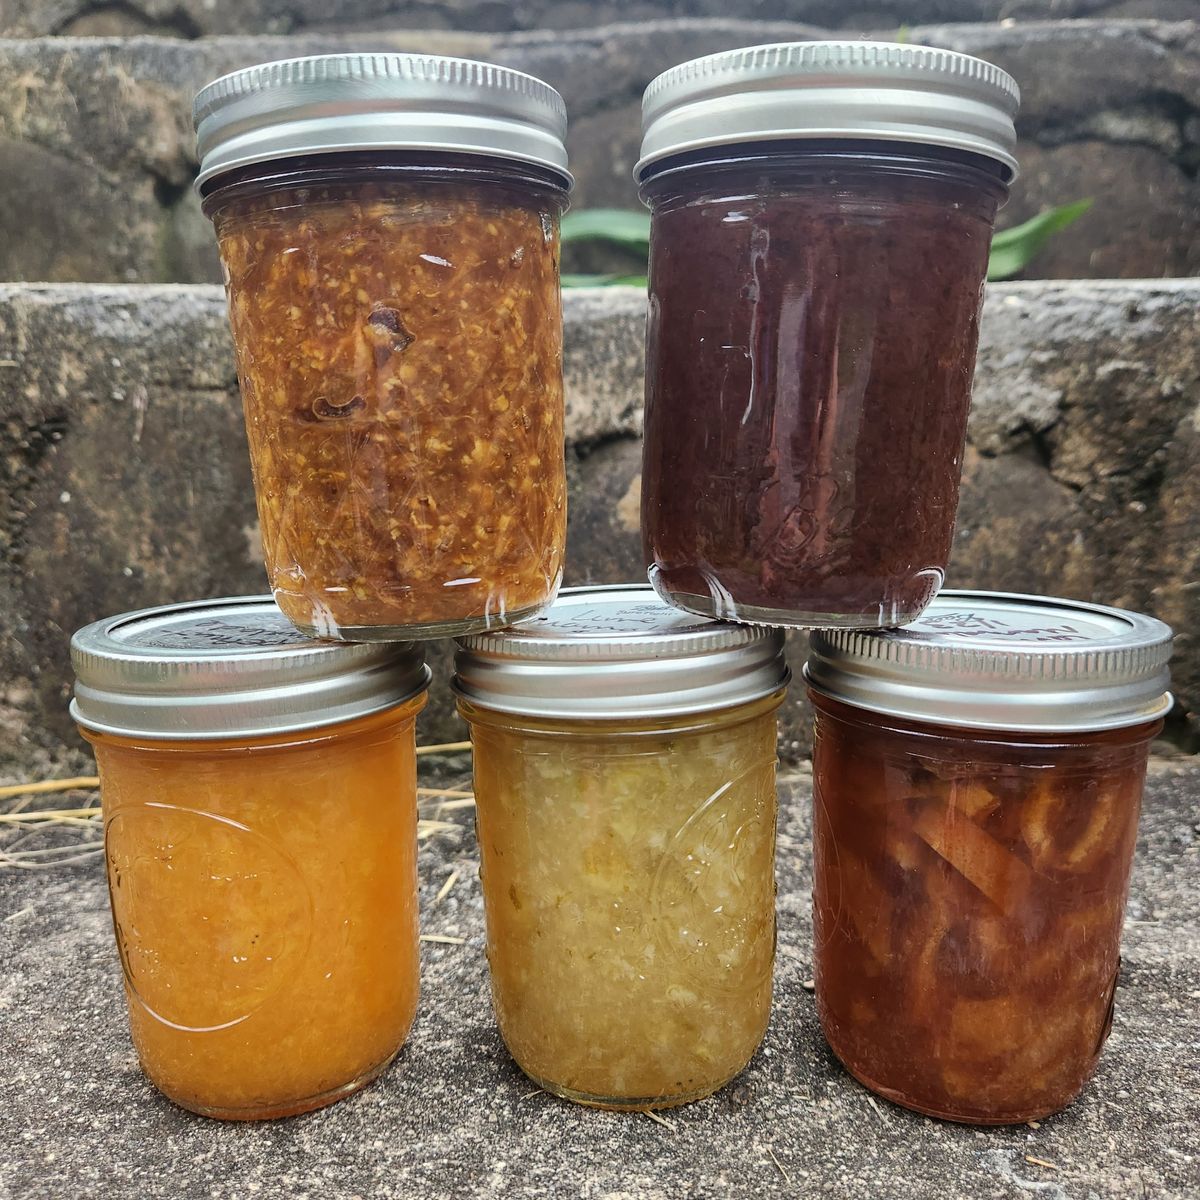 Canning 101: Jams, Jellies, & Marmalades, Oh My!